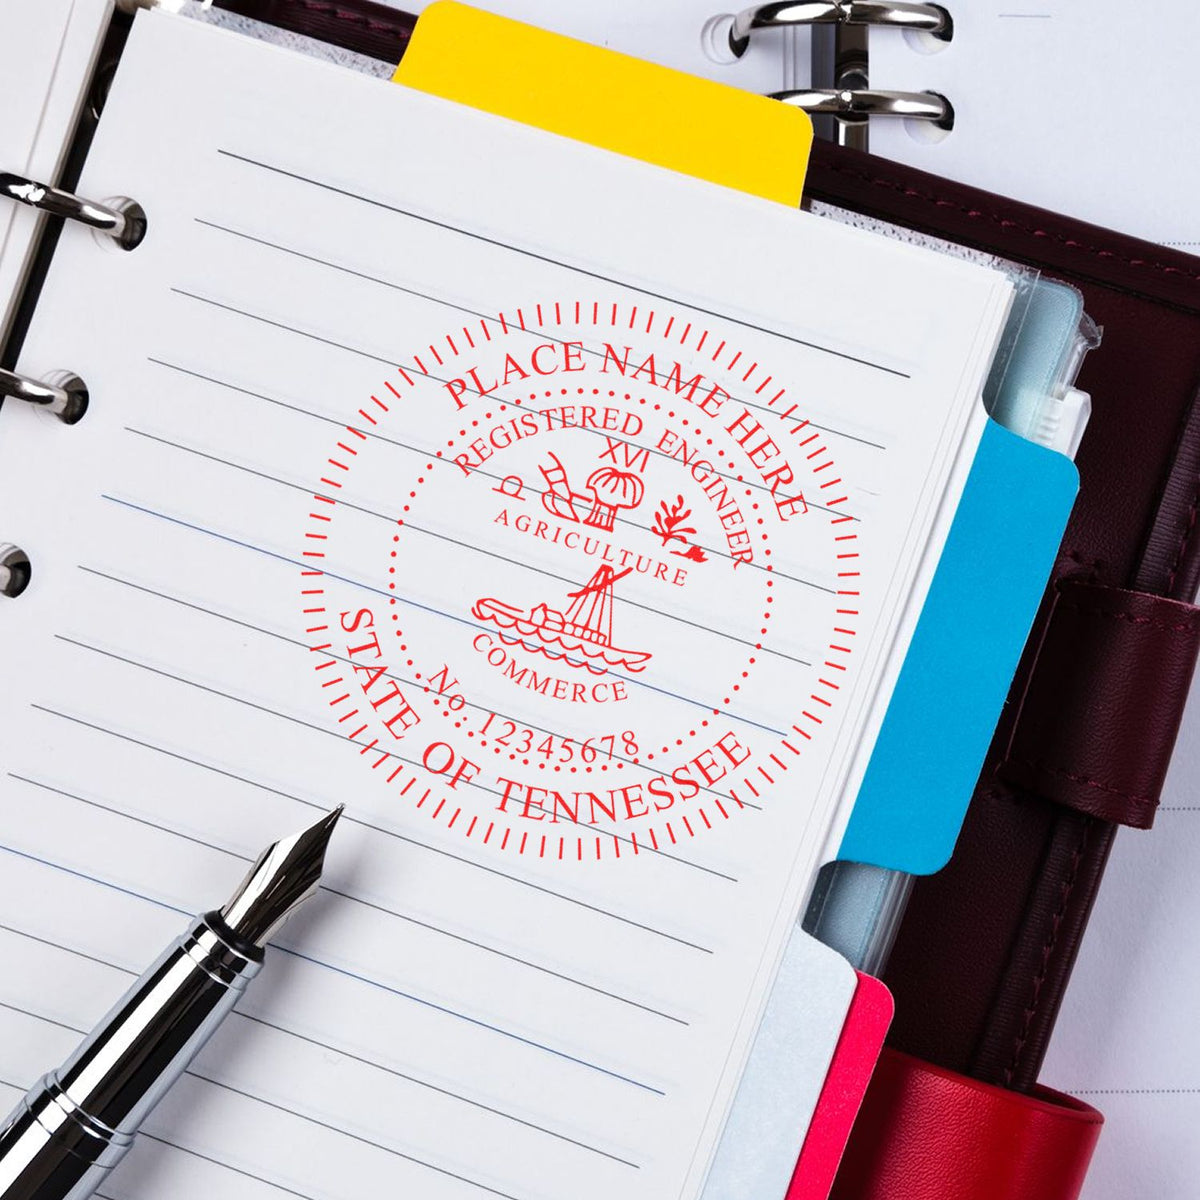 The Tennessee Professional Engineer Seal Stamp stamp impression comes to life with a crisp, detailed photo on paper - showcasing true professional quality.